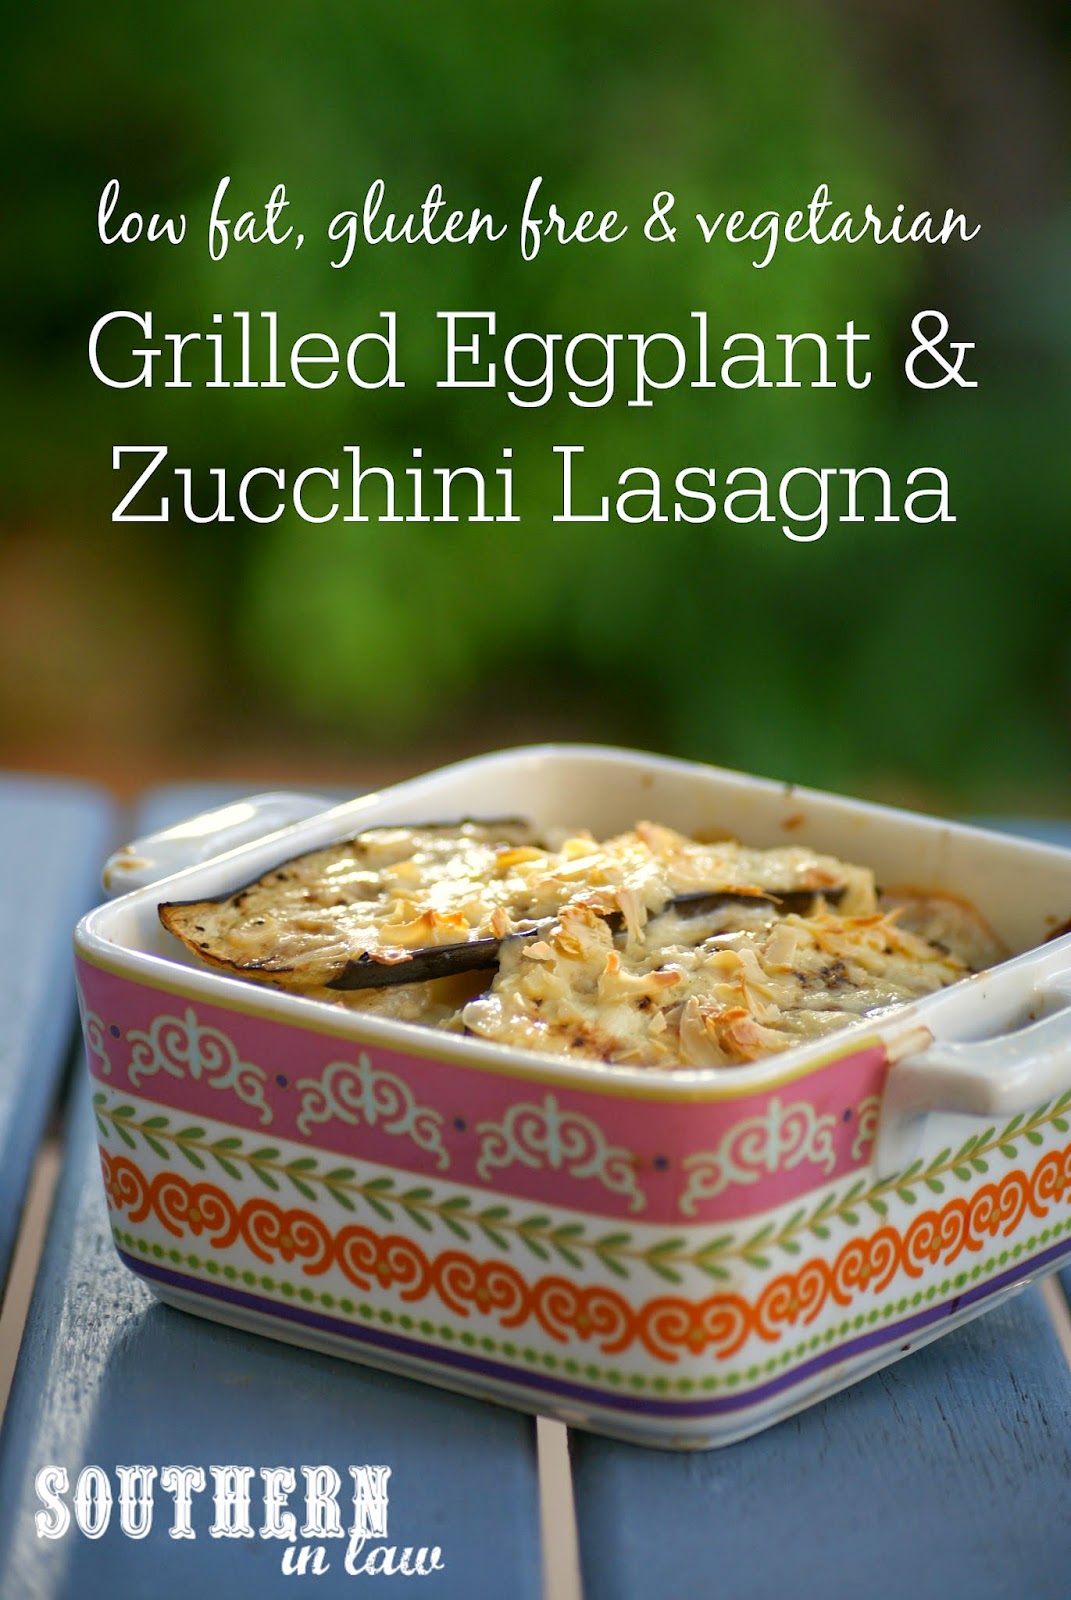 Gluten Free Grilled Eggplant and Zucchini Lasagna Recipe with Smoked Cheddar Cheese - low fat, gluten free, clean eating friendly, vegetarian, easy lasagna recipe